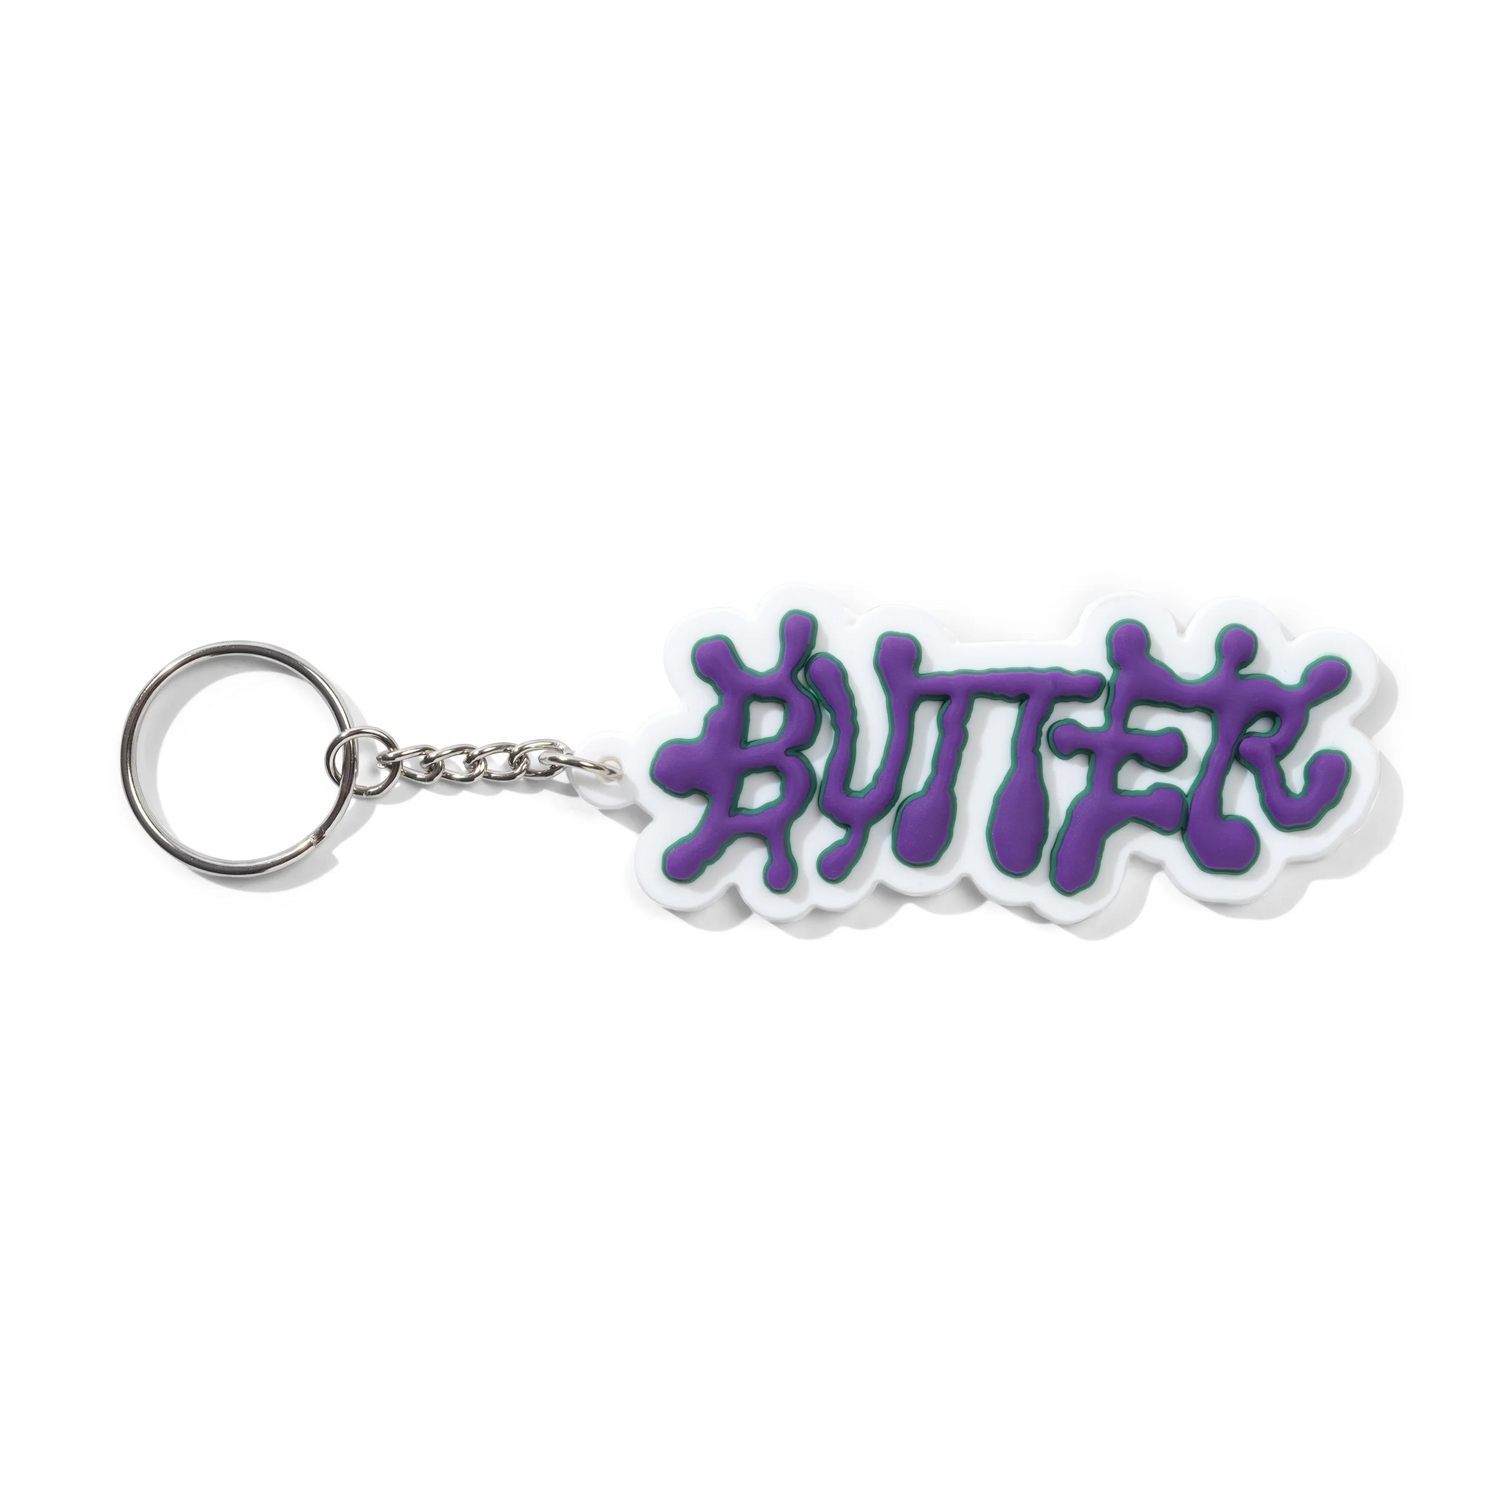 Ink Rubber Key Chain, White